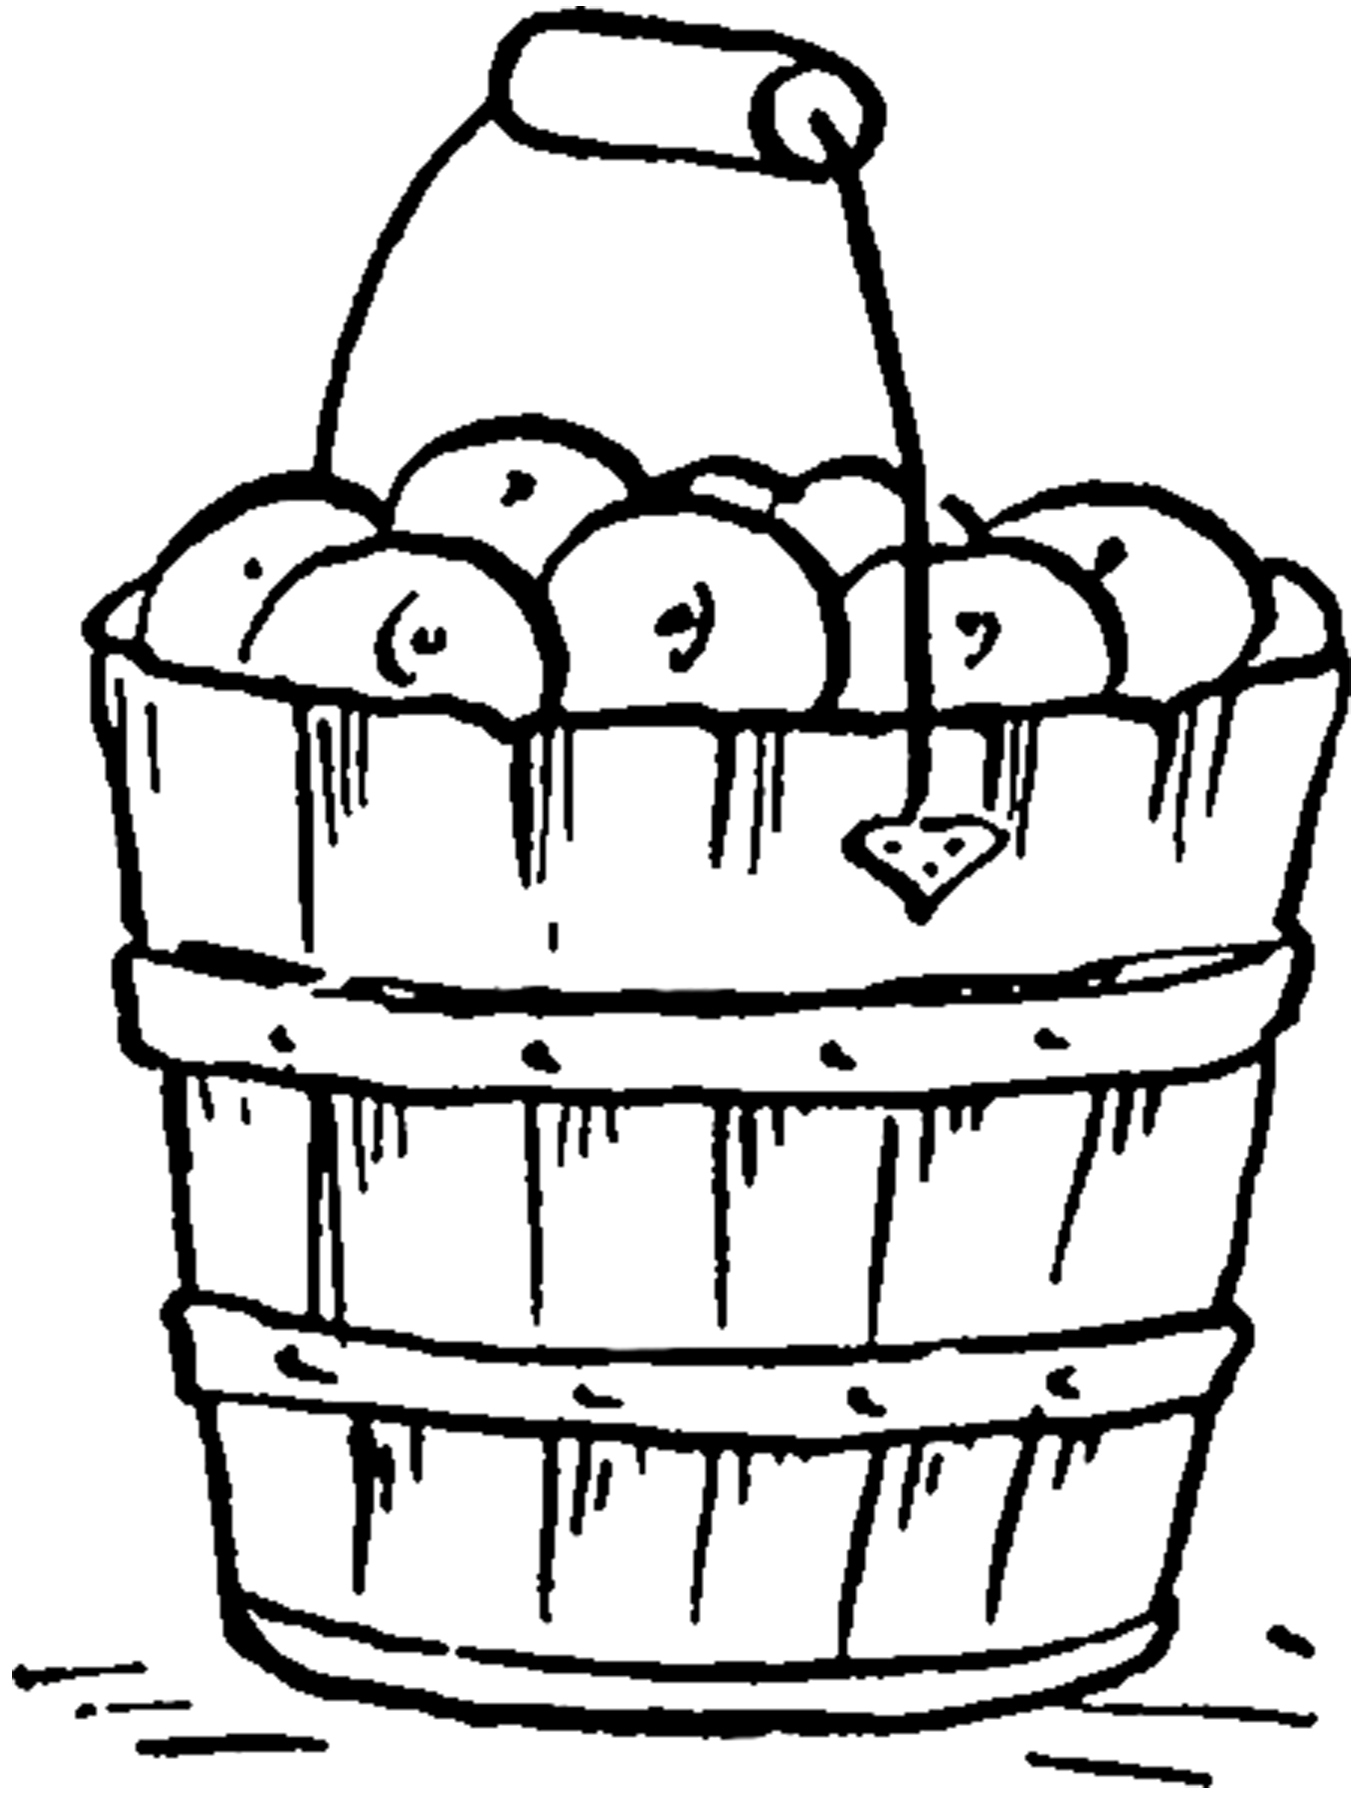 storefront clipart black and white apple